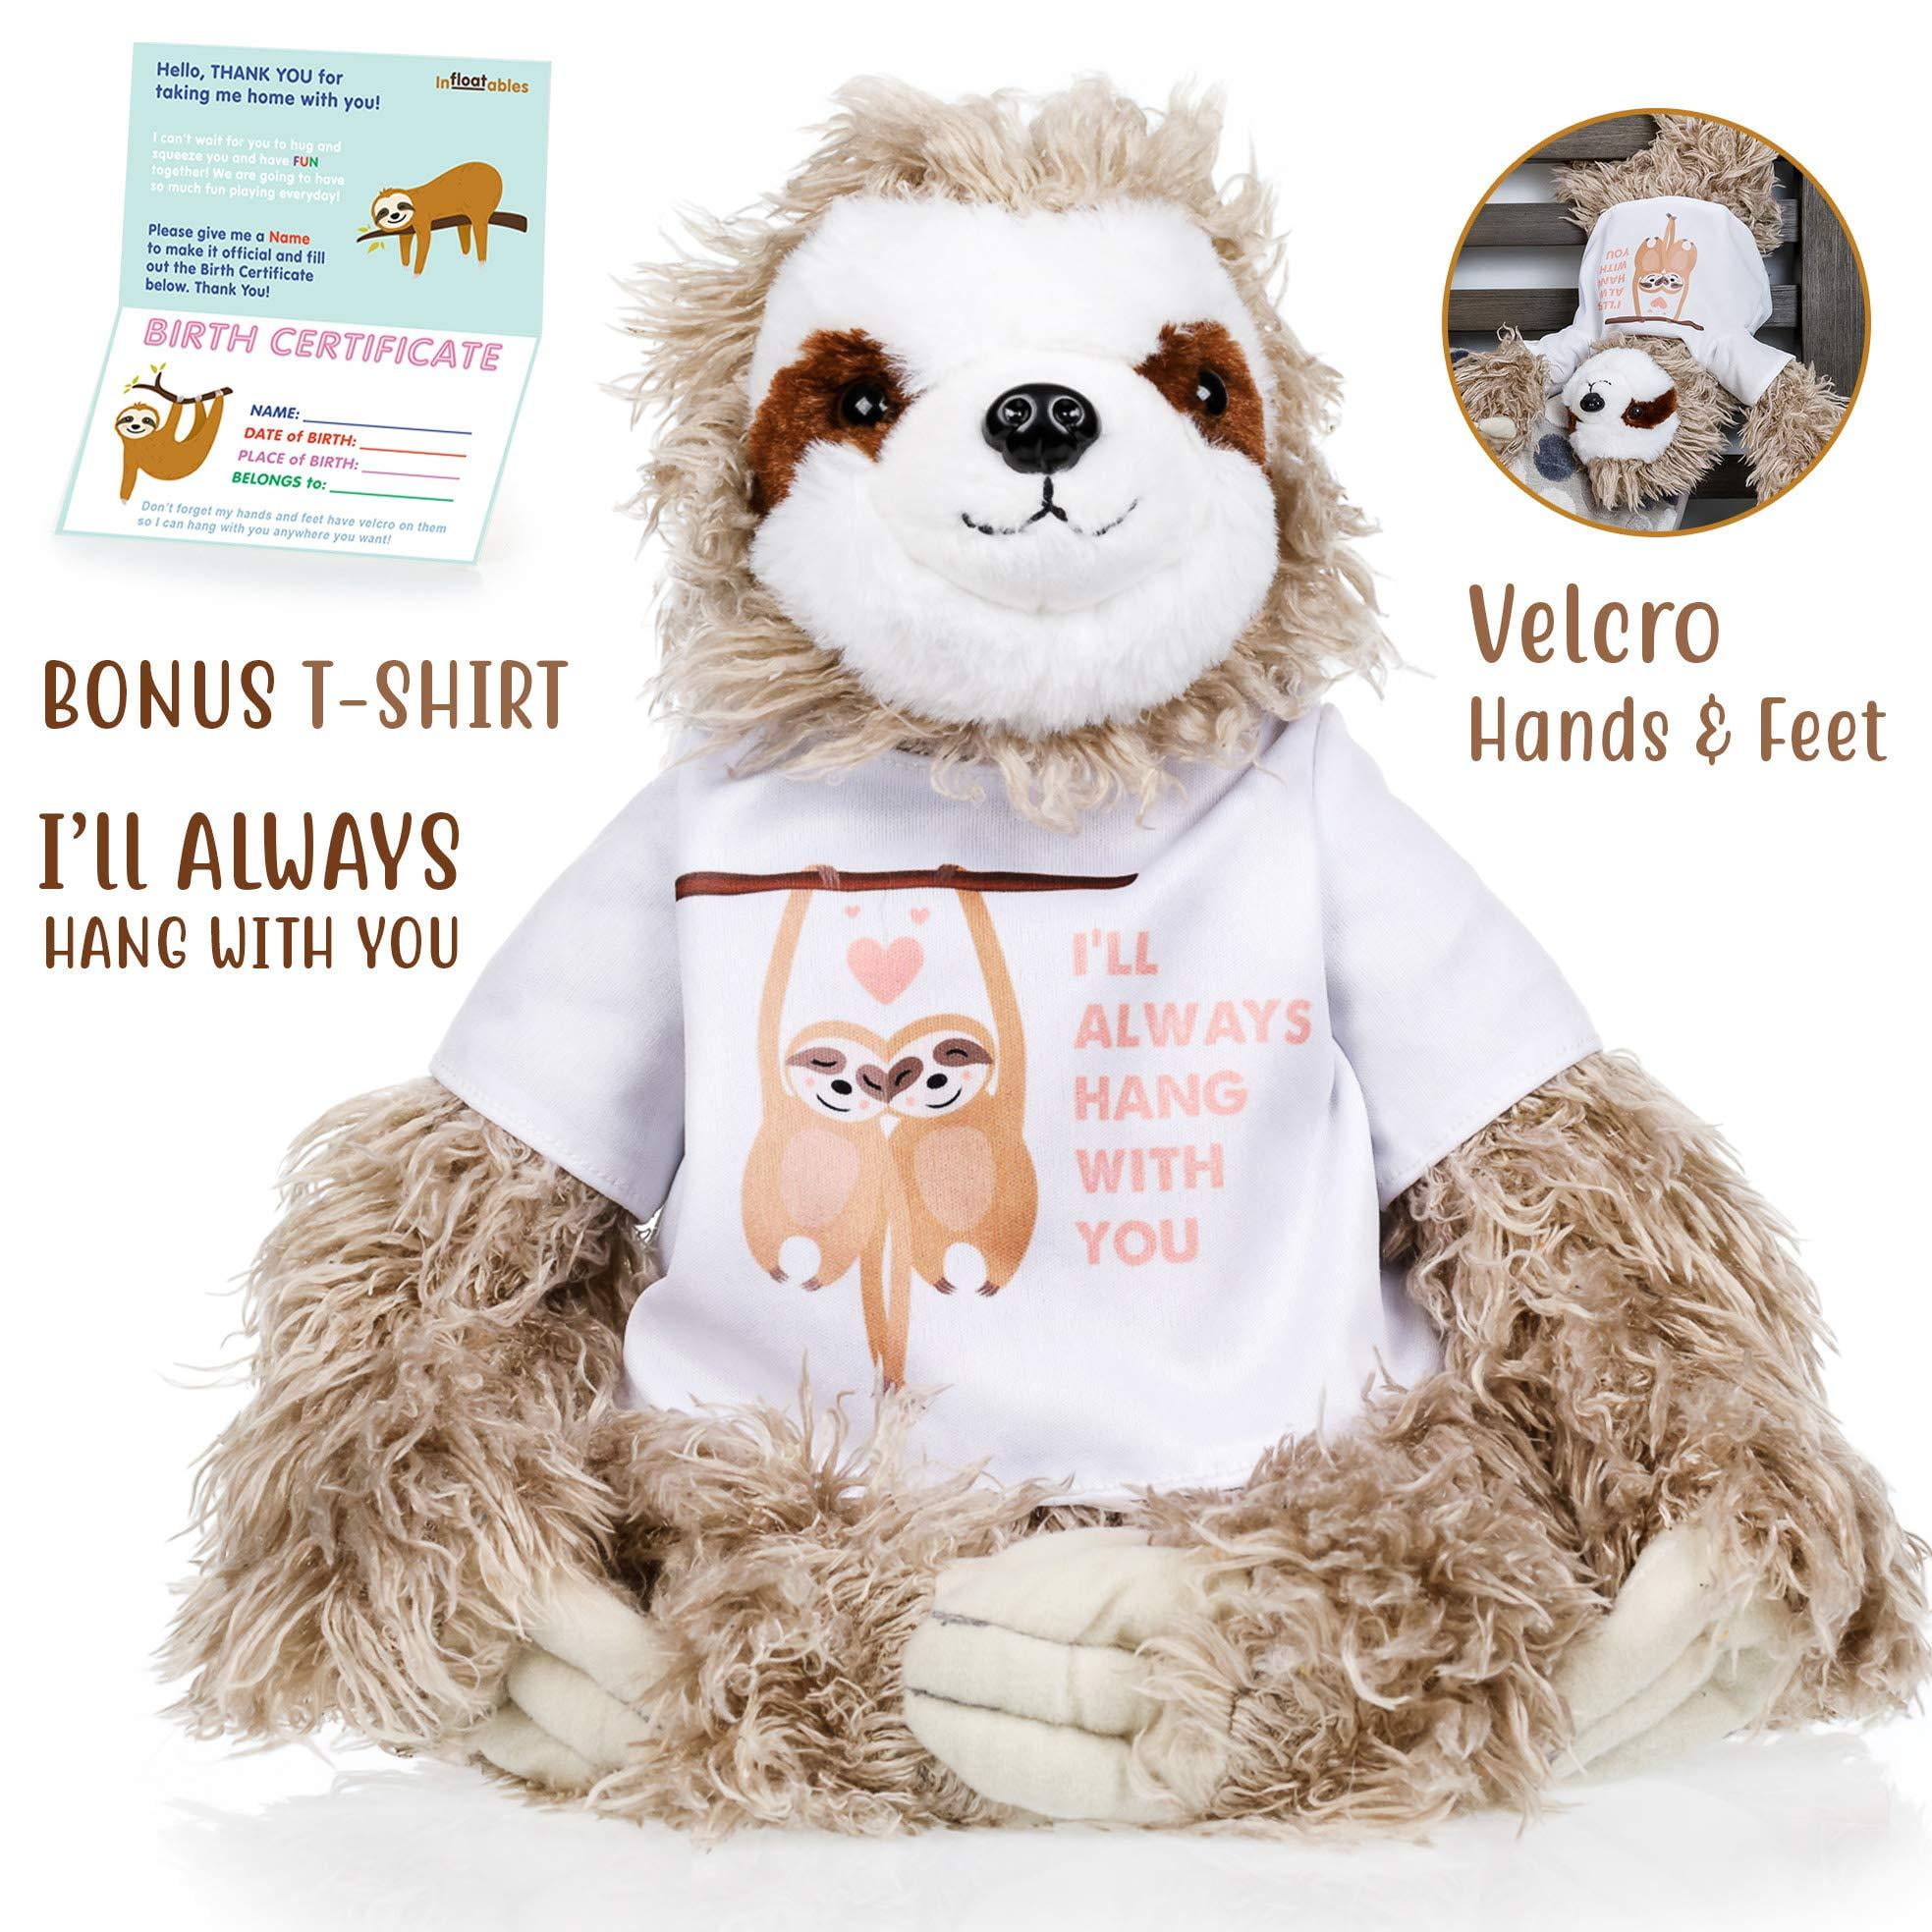 FINDING NATURE LARGE SLOTH CUTE SOFT CUDDLY CUTE PLUSH REALISTIC STUFFED TOY 